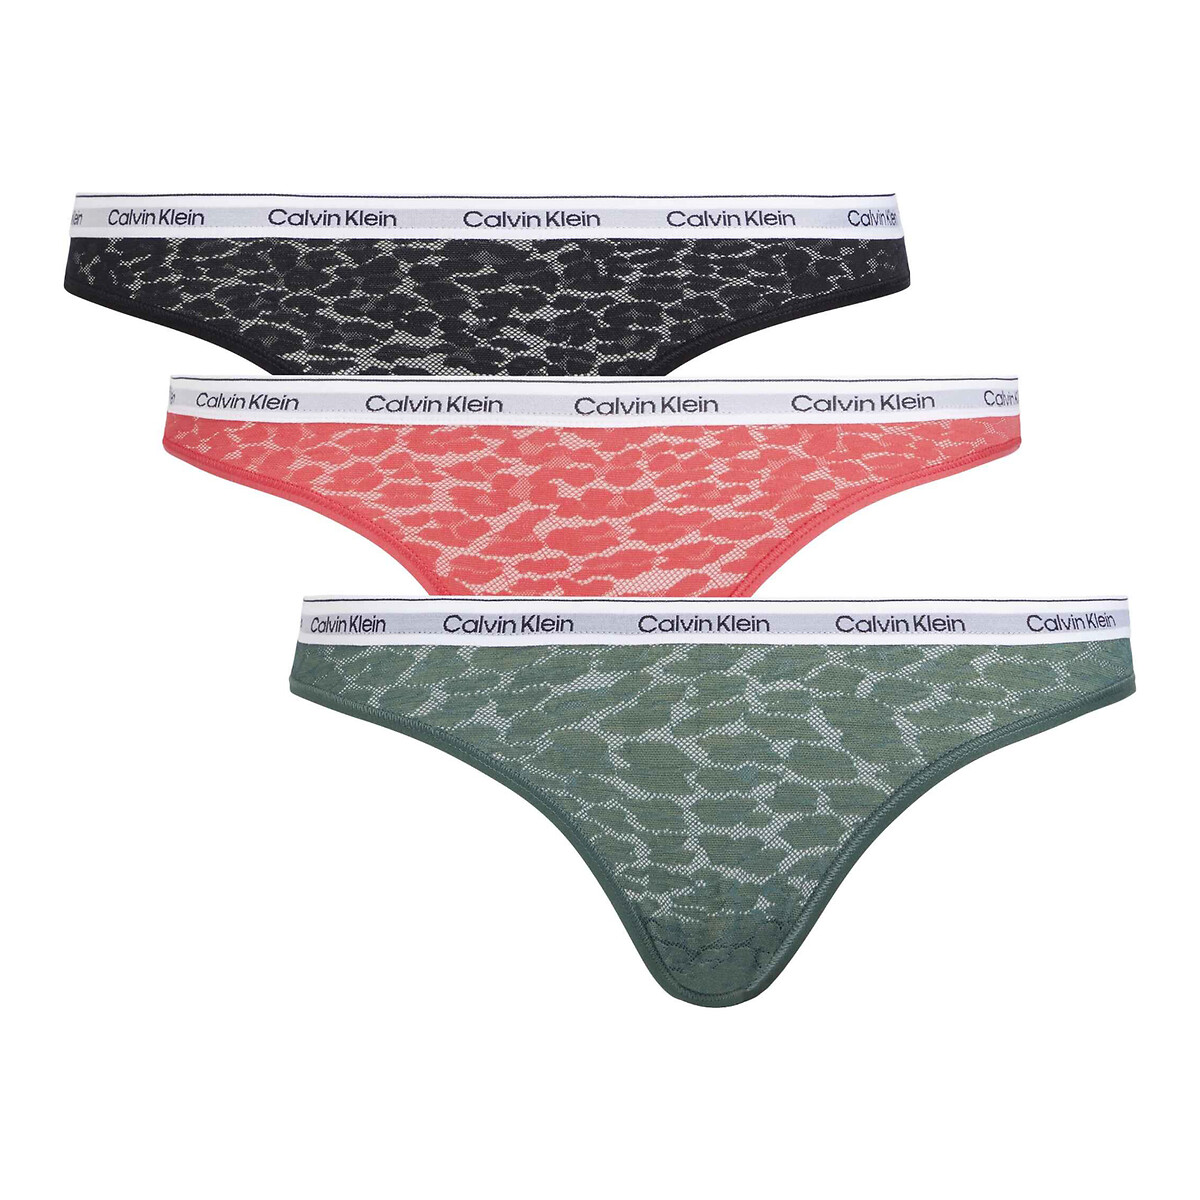 Pack of 3 modern logo lace knickers, green/pink/black, Calvin Klein